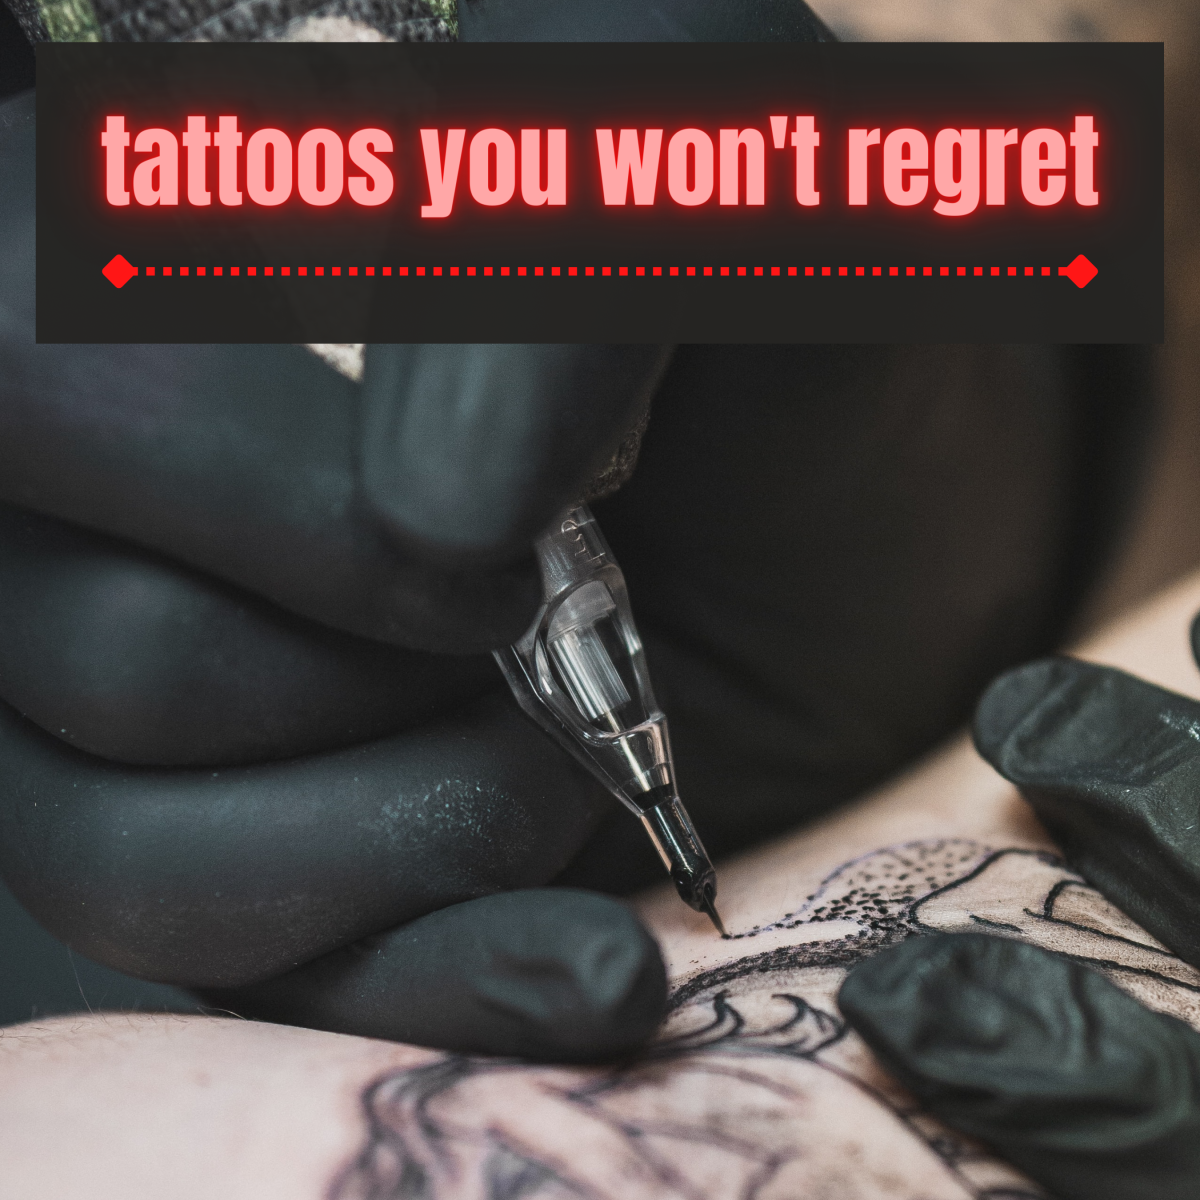 How to Get a Tattoo That You Won't Regret